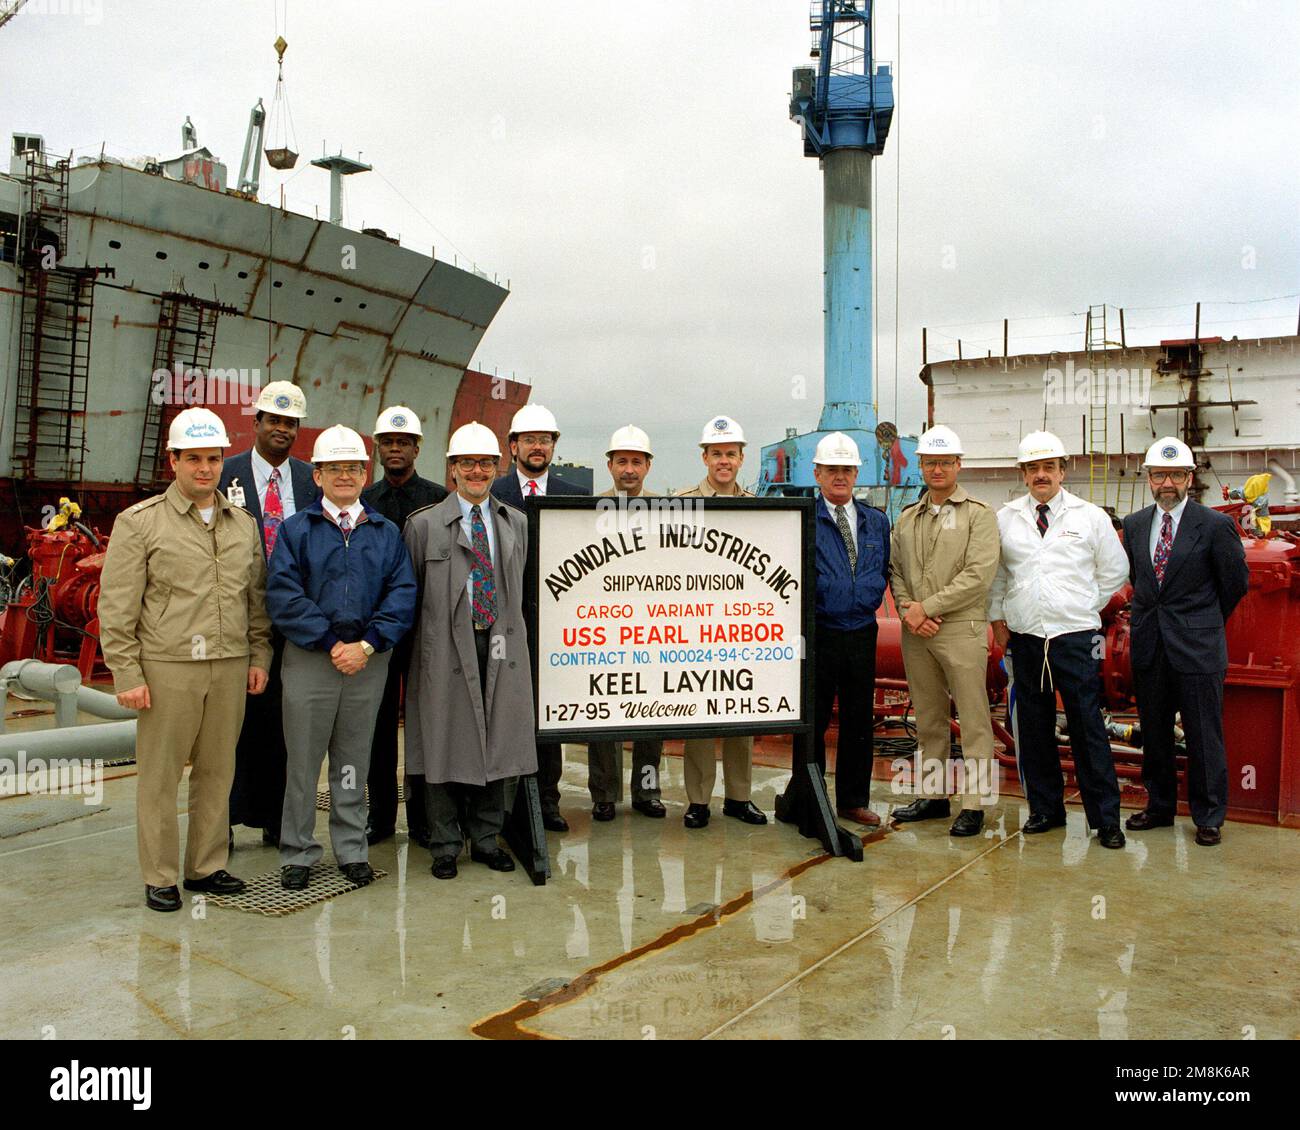 The official party at the keel laying of the dock landing ship Pearl Harbor (LSD-52). (L-R) LT. Frank Simei, Proj. Officer; H.J. Brown, Hull Mgr; A.J. Thibodeaux, Proj. Mgr; T.E. Johnson, Asst. Hull Mgr; Carey Agregaard, Asst. Program Mgr; James Roemer, CHIEF Engineer; Louis Duet, Asst. Configuration Mgr; CDR. James L. Jenkins, USN, Supervisor of Shipbuilding; Ronnie Clark, Lead Production Engineer; LCDR. Bill Salinas, USN, Project Officer; David Gordon, Program Mgr; Bernard P. Clark, Deputy Supervisor of Shipbuilding. Base: Avondale State: Louisiana (LA) Country: United States Of America (USA Stock Photo